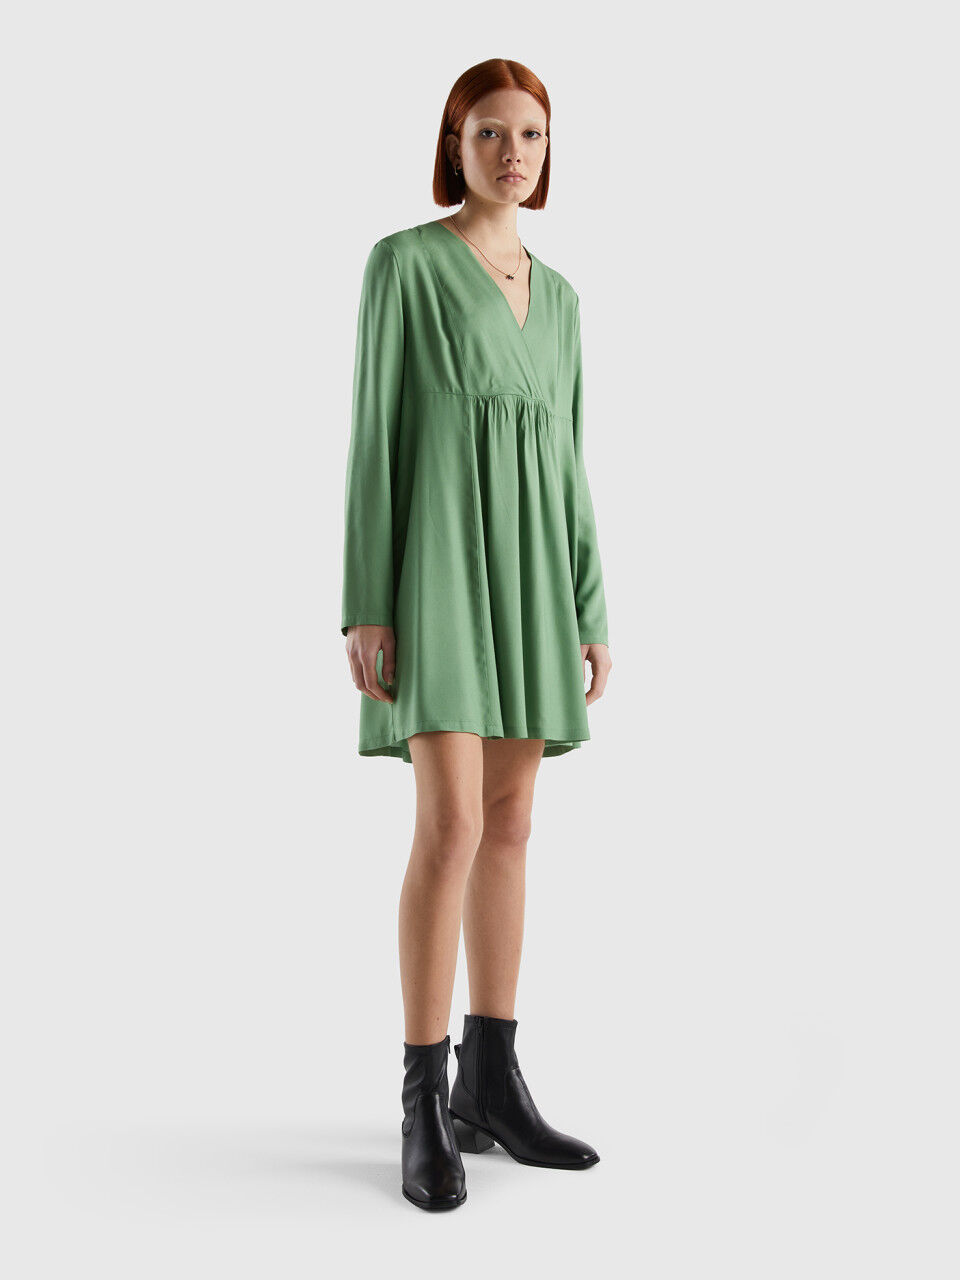 Short dress in sustainable viscose